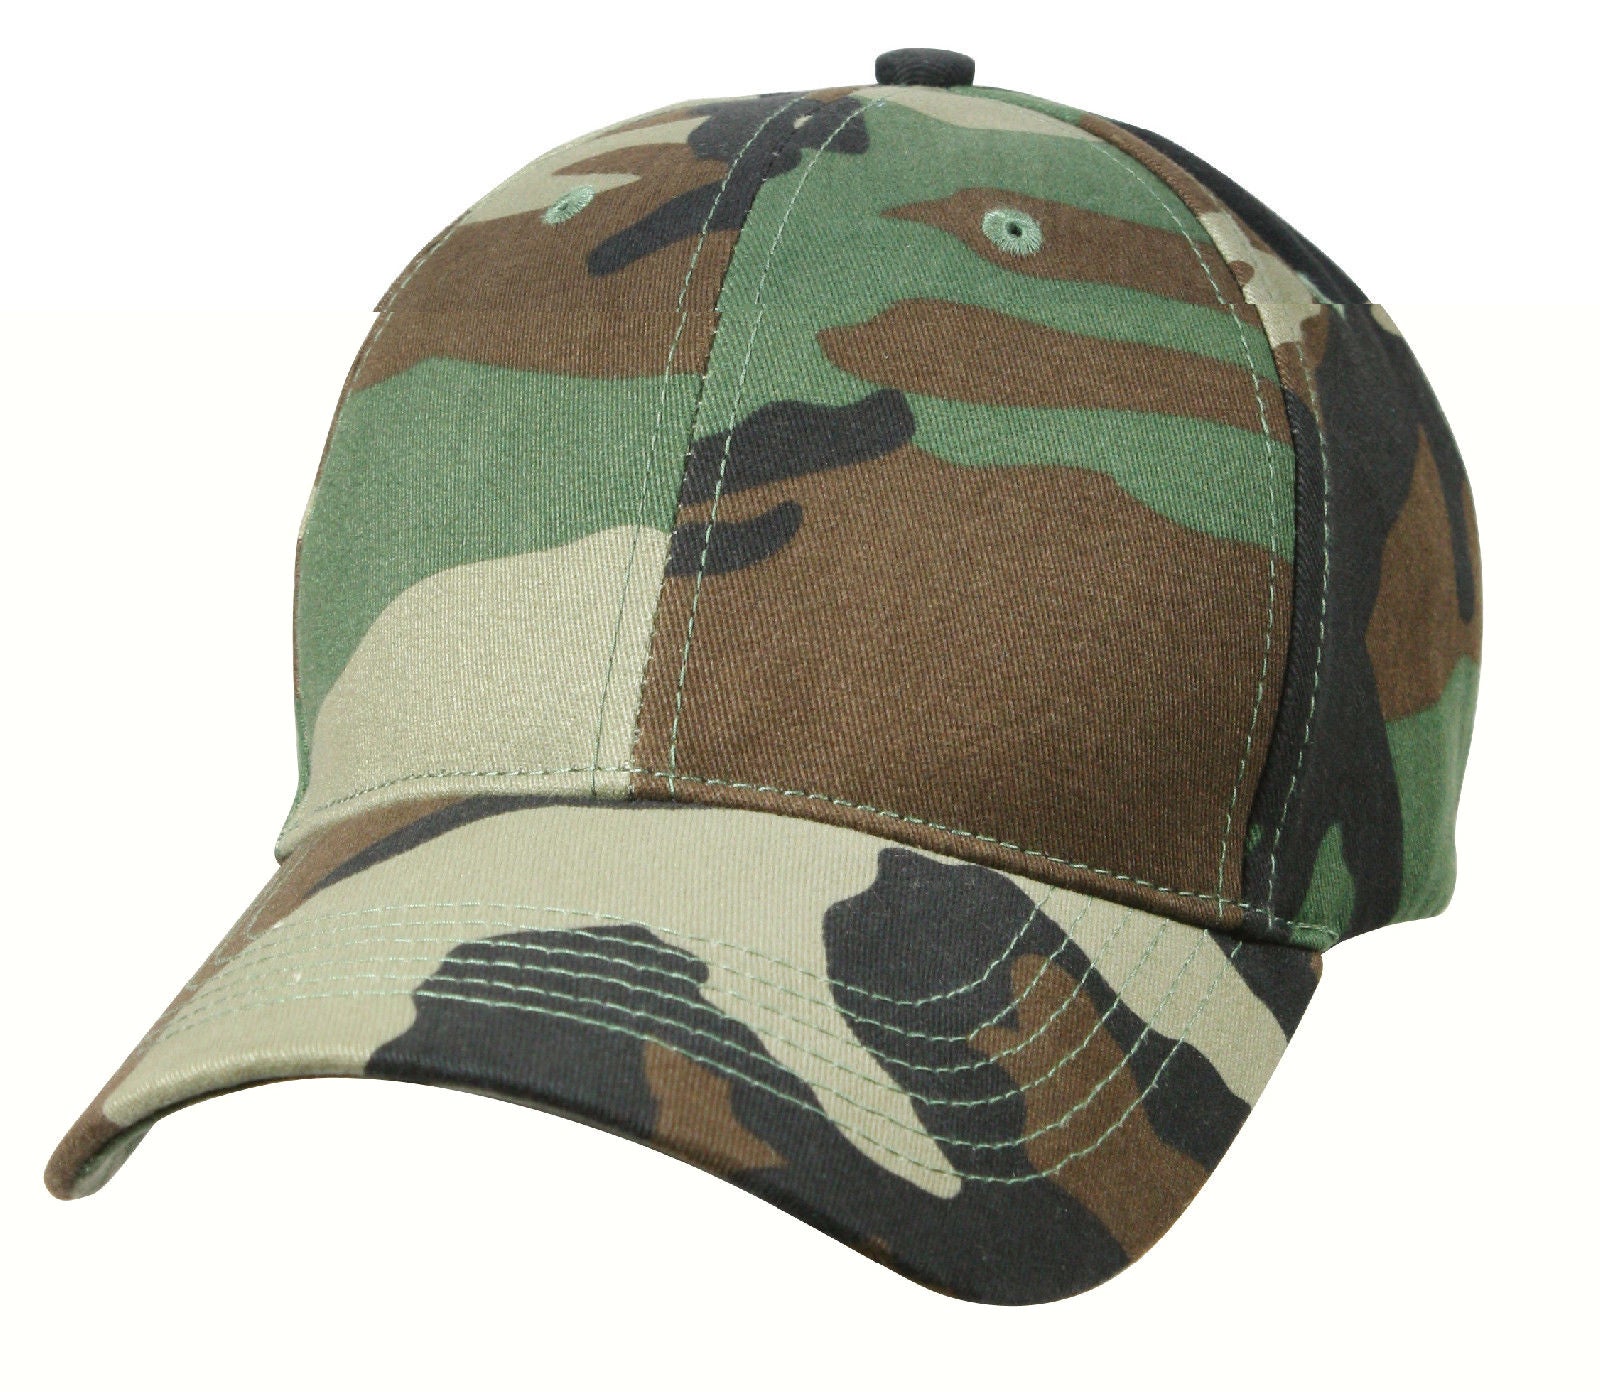 Kids Low Profile Baseball Hats - Caps Available In Woodland Camo And A ...